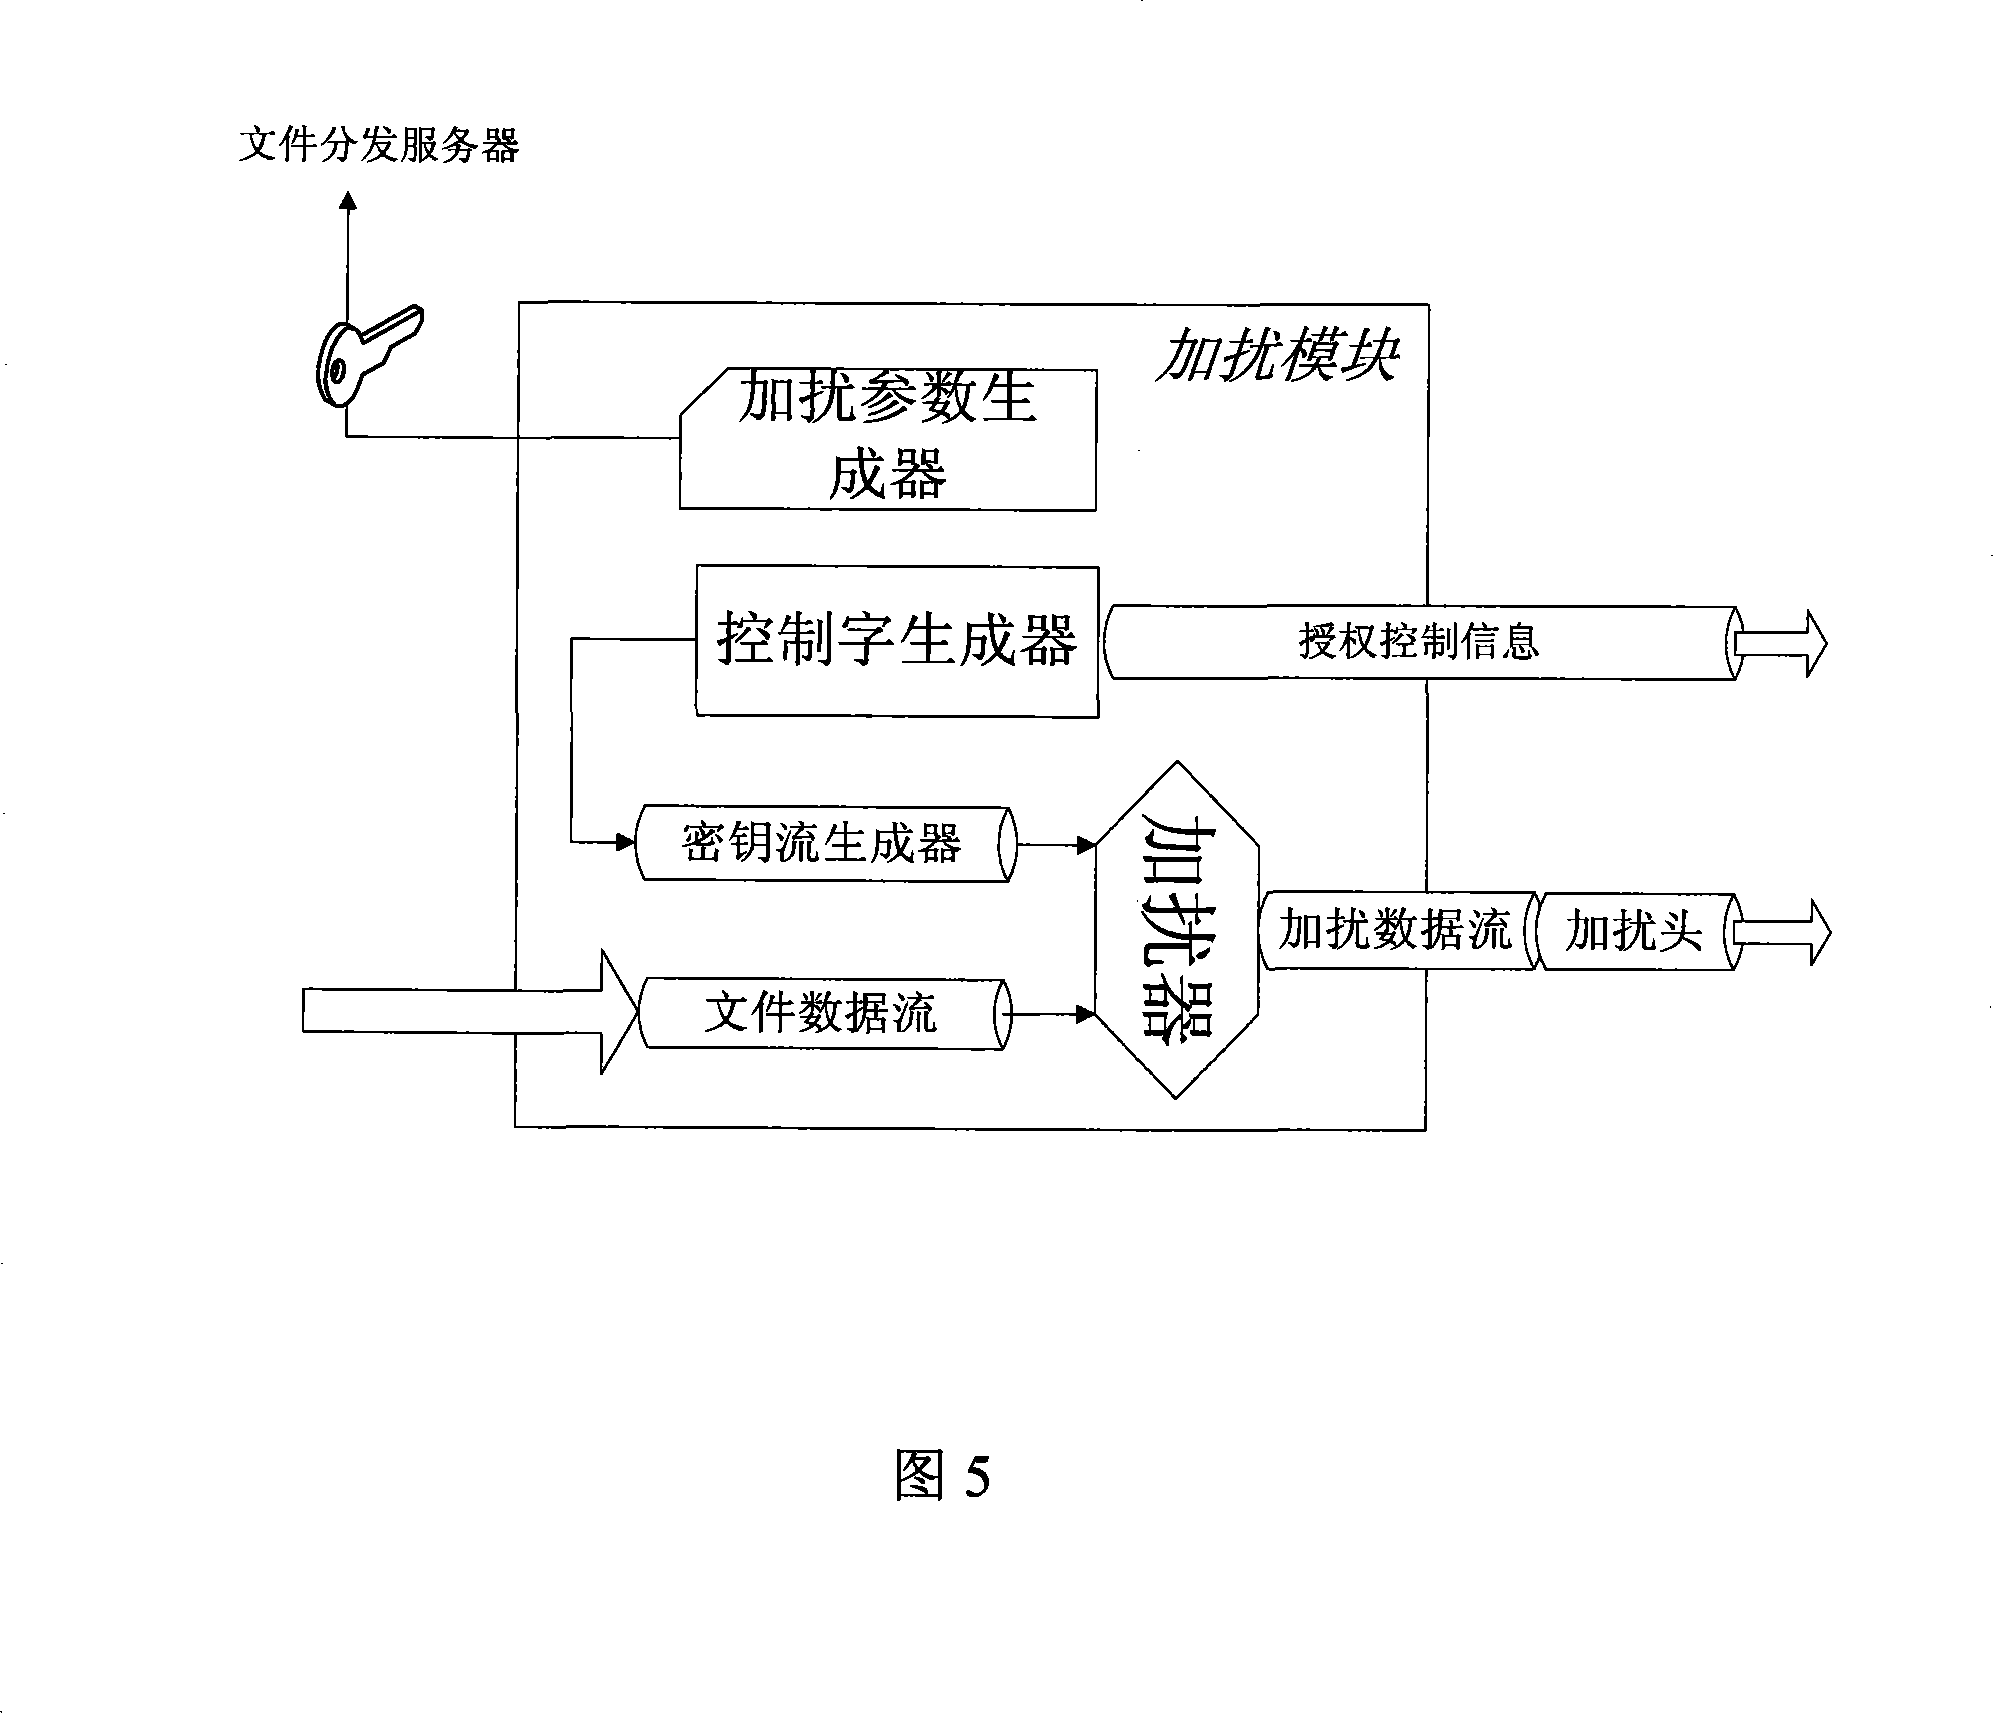 Method and system of document transmission